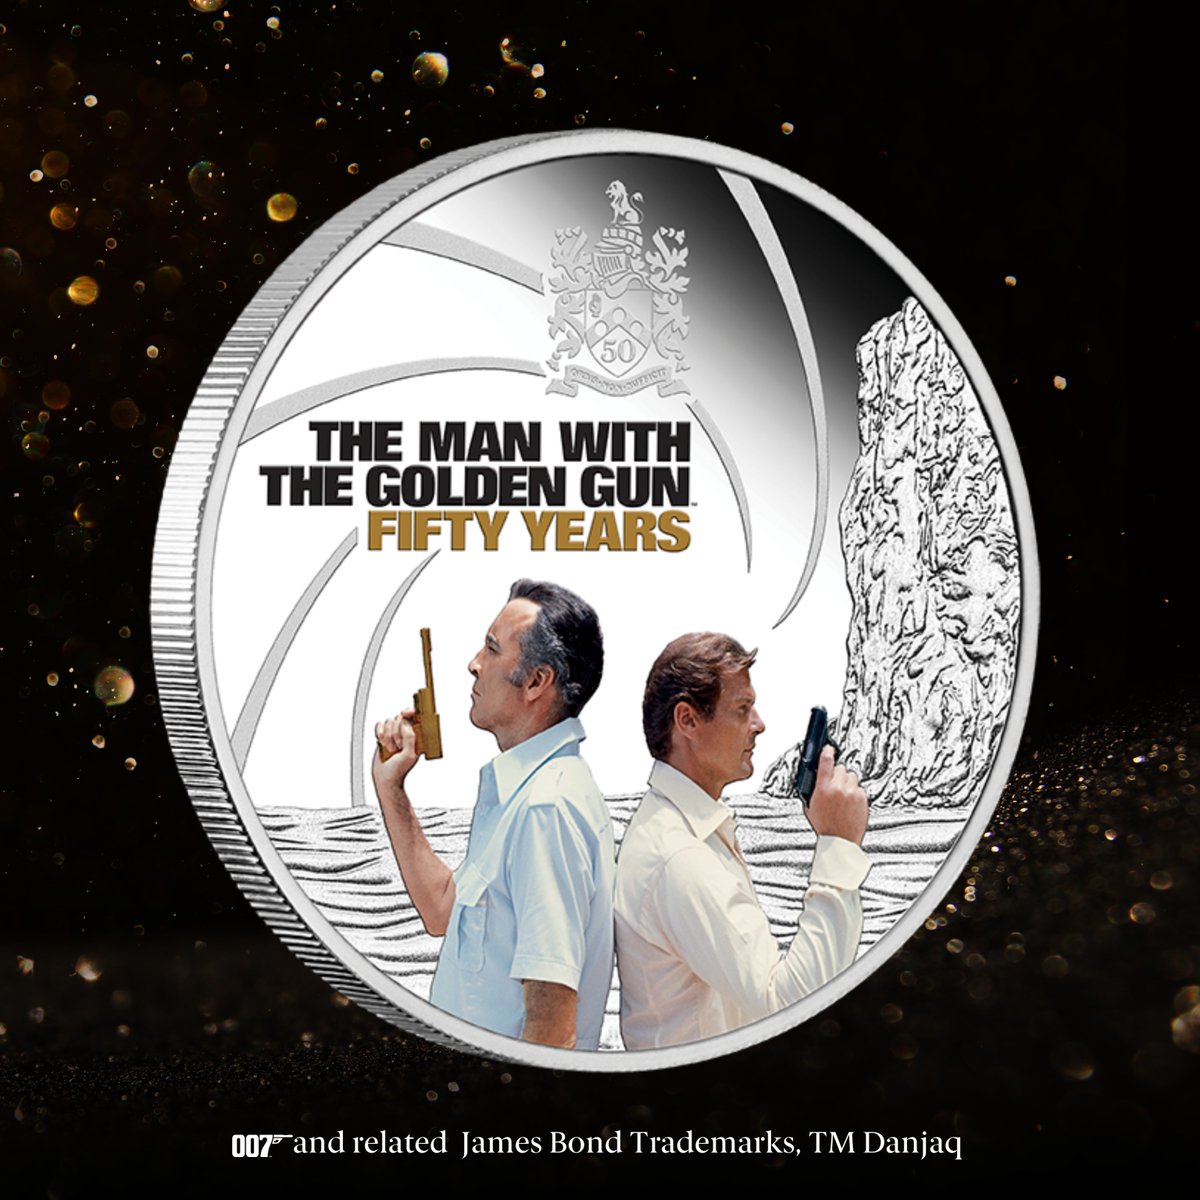 Celebrating 50 years of 𝑇ℎ𝑒 𝑀𝑎𝑛 𝑊𝑖𝑡ℎ 𝑇ℎ𝑒 𝐺𝑜𝑙𝑑𝑒𝑛 𝐺𝑢𝑛 with this unique James Bond collectible. This must have Bond coin is made of 99.99% pure silver and out now. Get yours here | ow.ly/QeEW50RcPIC
#PerthMint #Numismatics #CoinCollecting #JamesBond #007